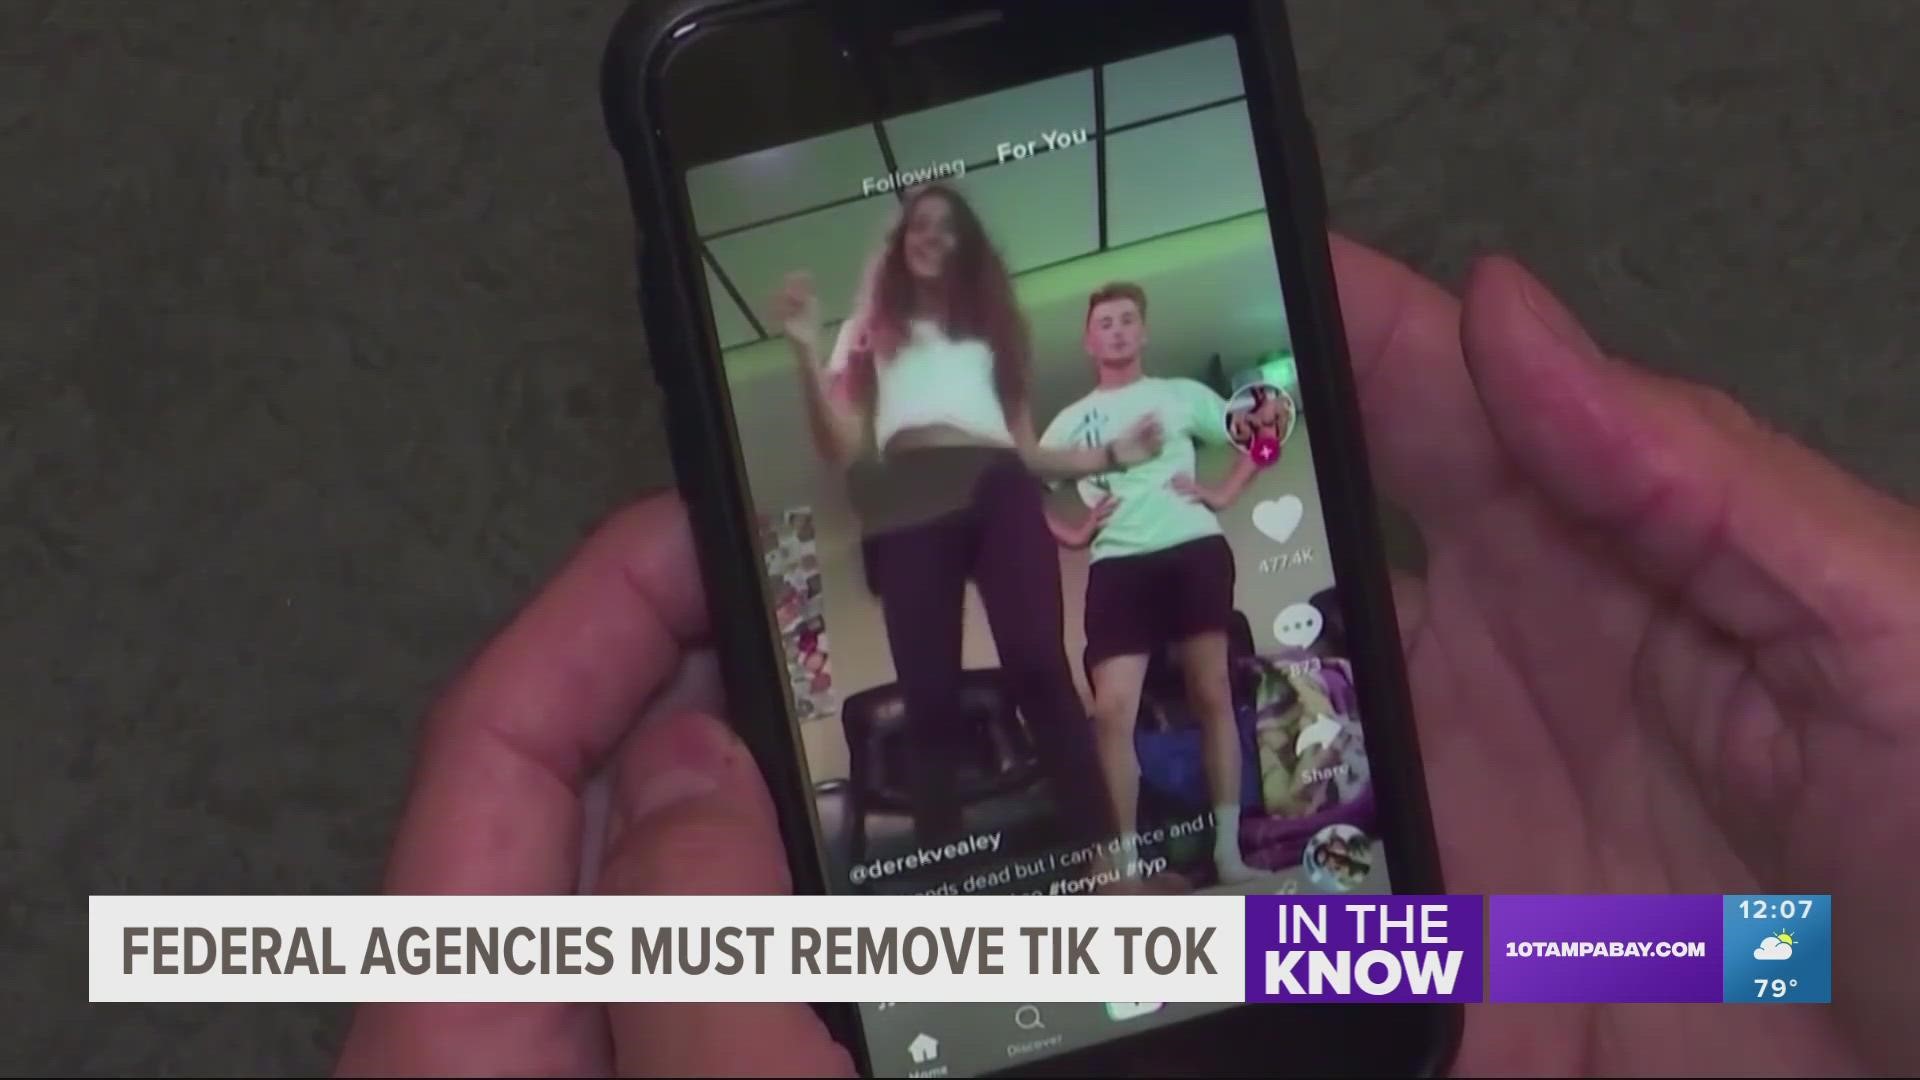 The White House is giving federal agencies 30 days to remove TikTok from all government devices.